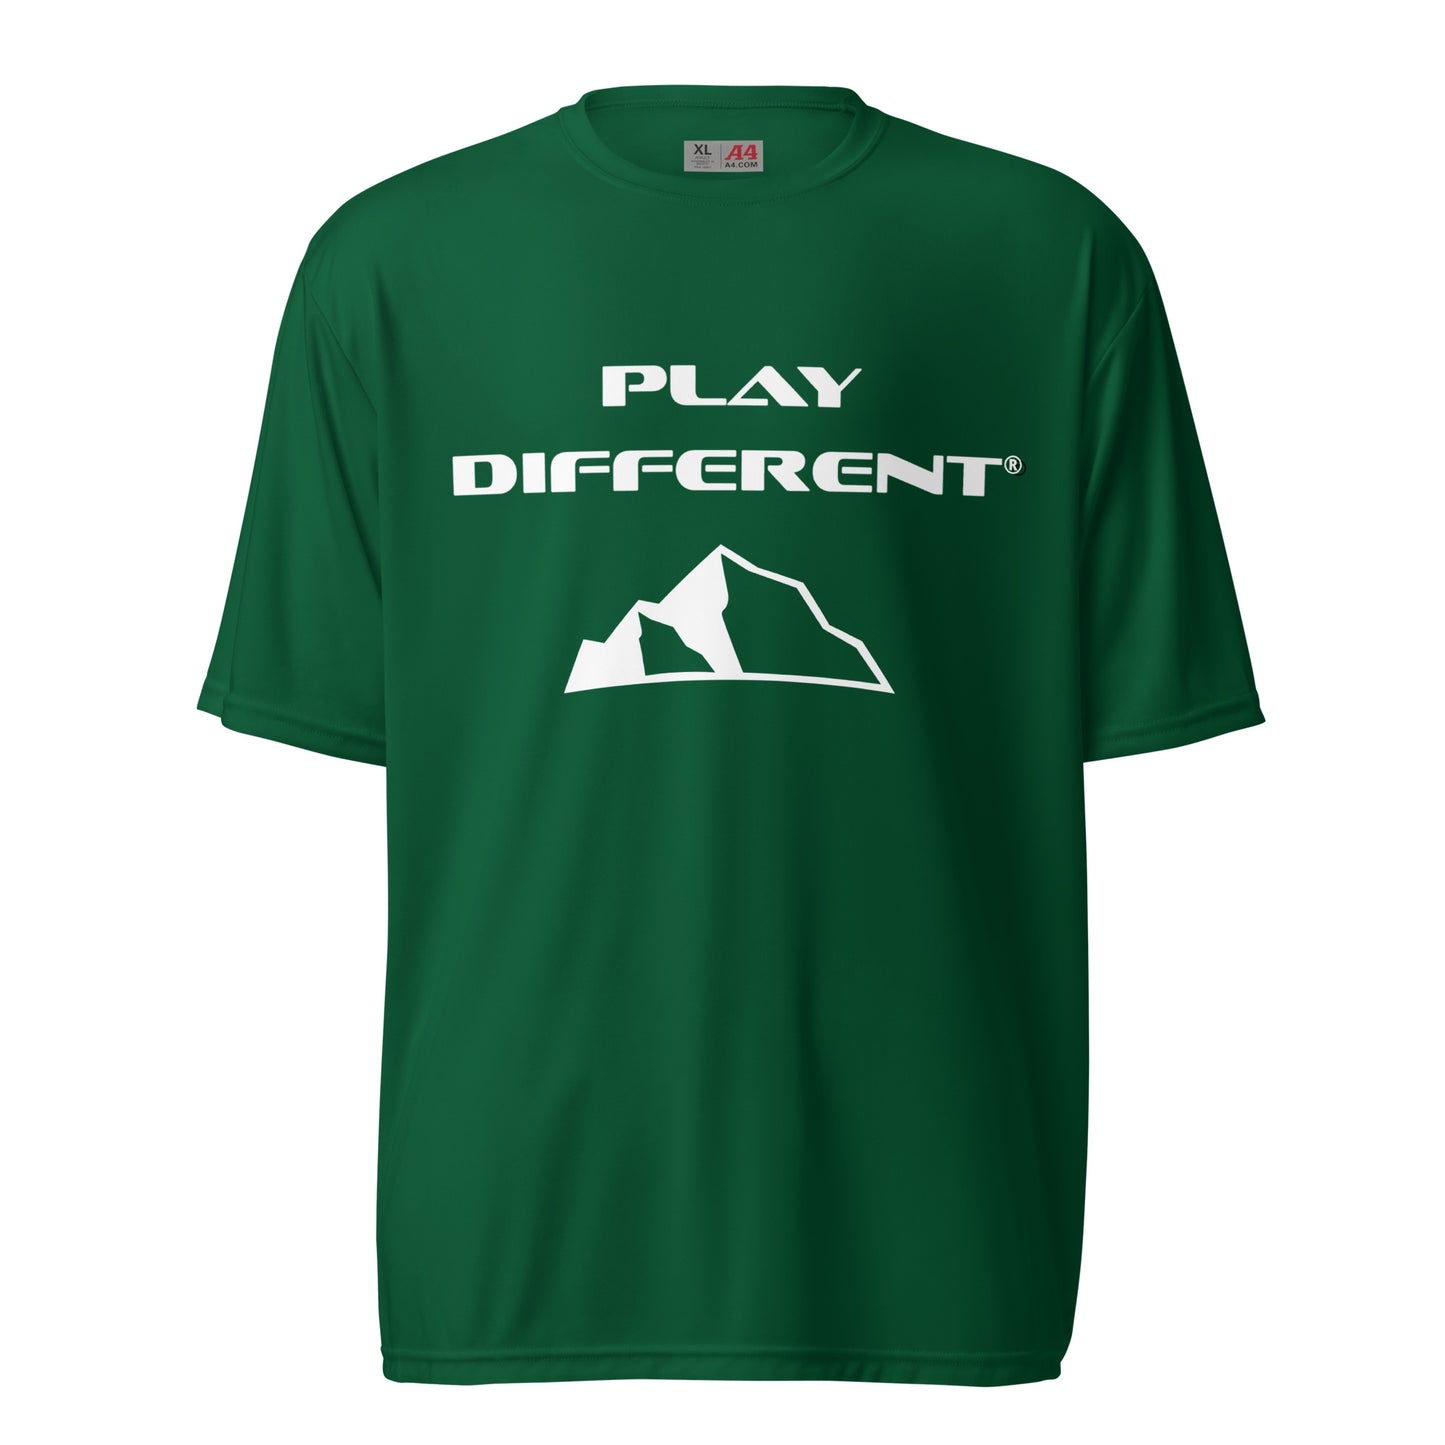 Play Different® Unisex performance crew neck t-shirt forest green